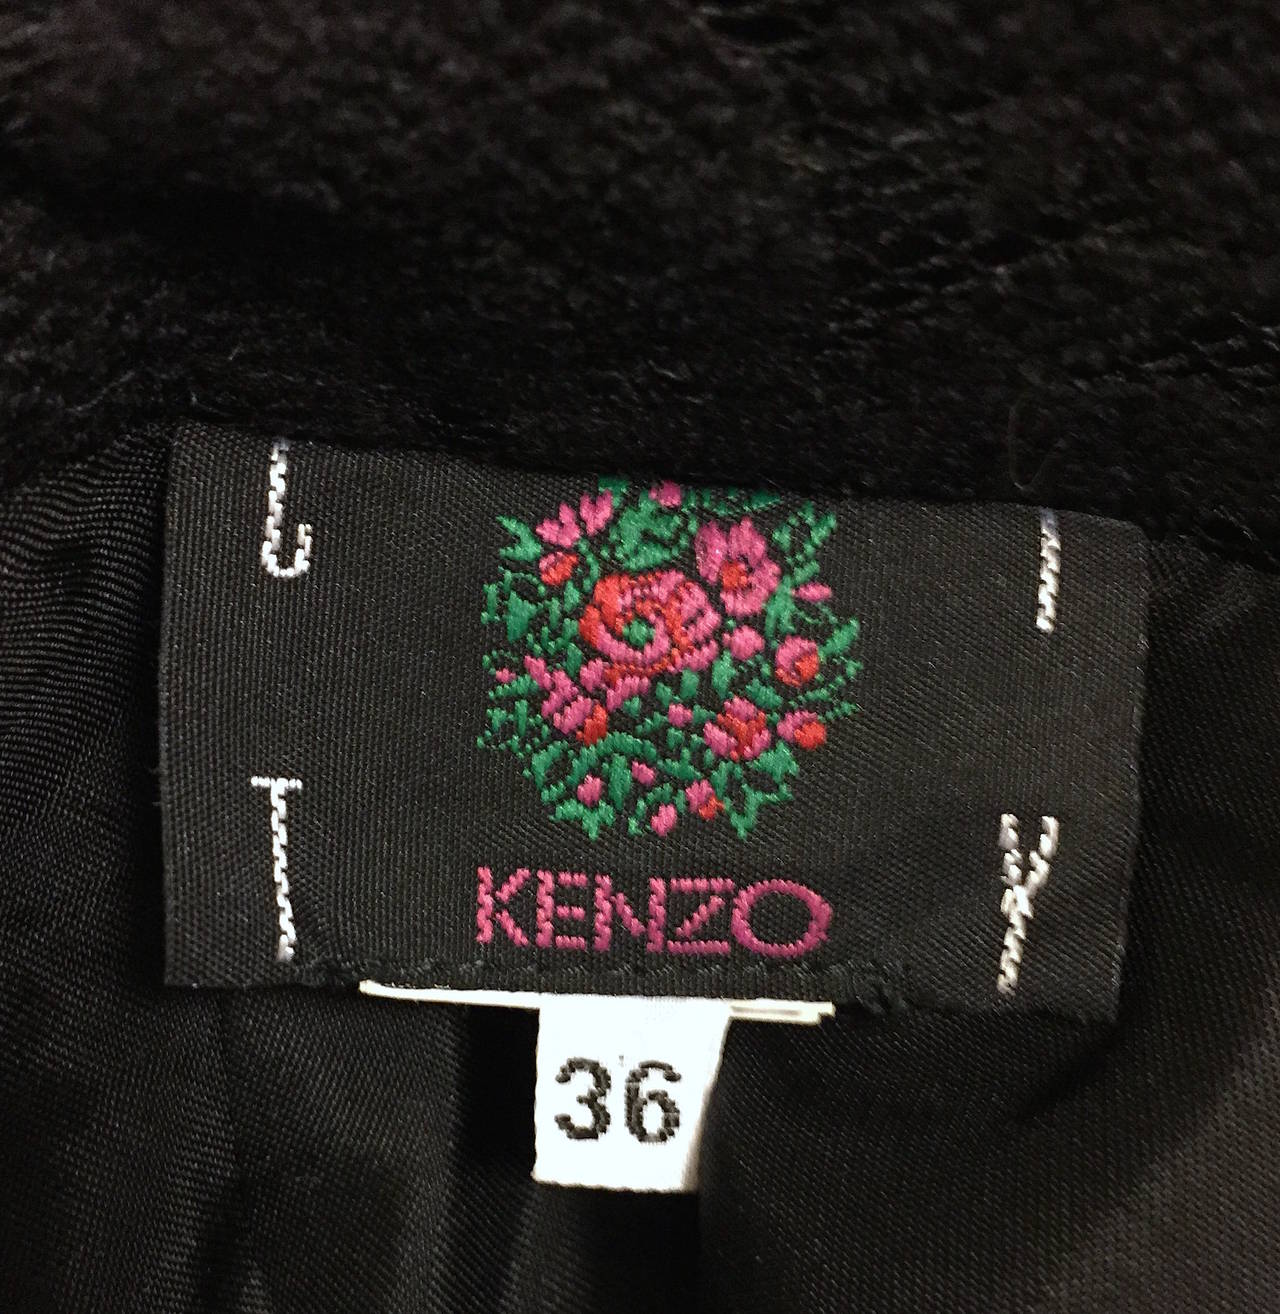 Rare Kenzo Folkloric Inspired Jacket and Lace Skirt For Sale 3